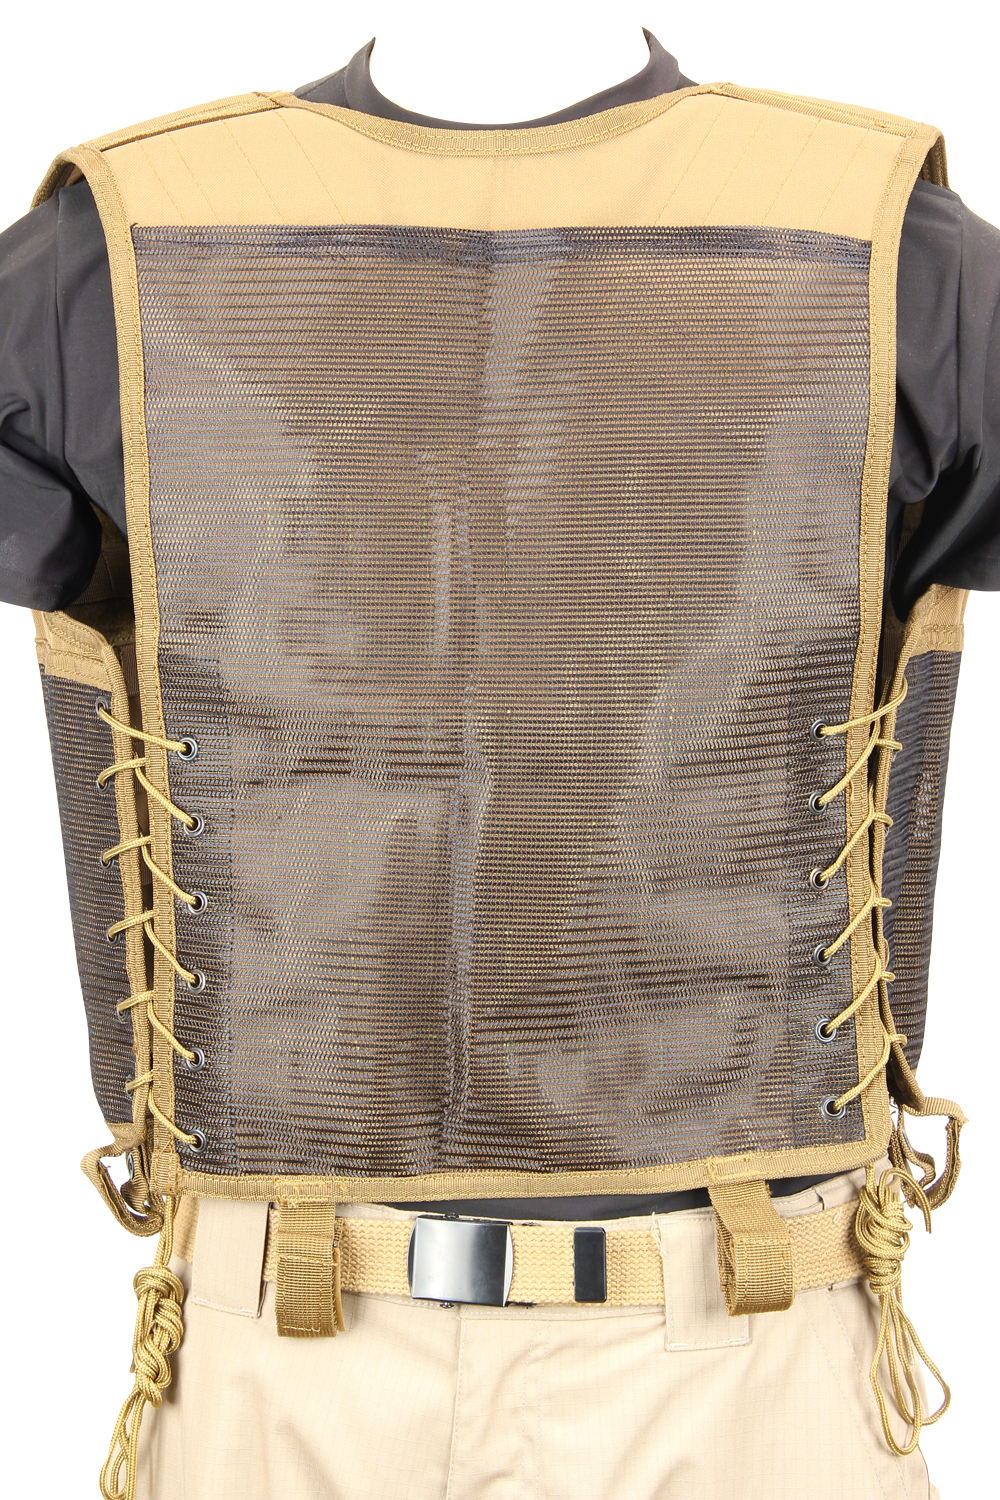 The Mission Convertible Vest | North Star Tactical